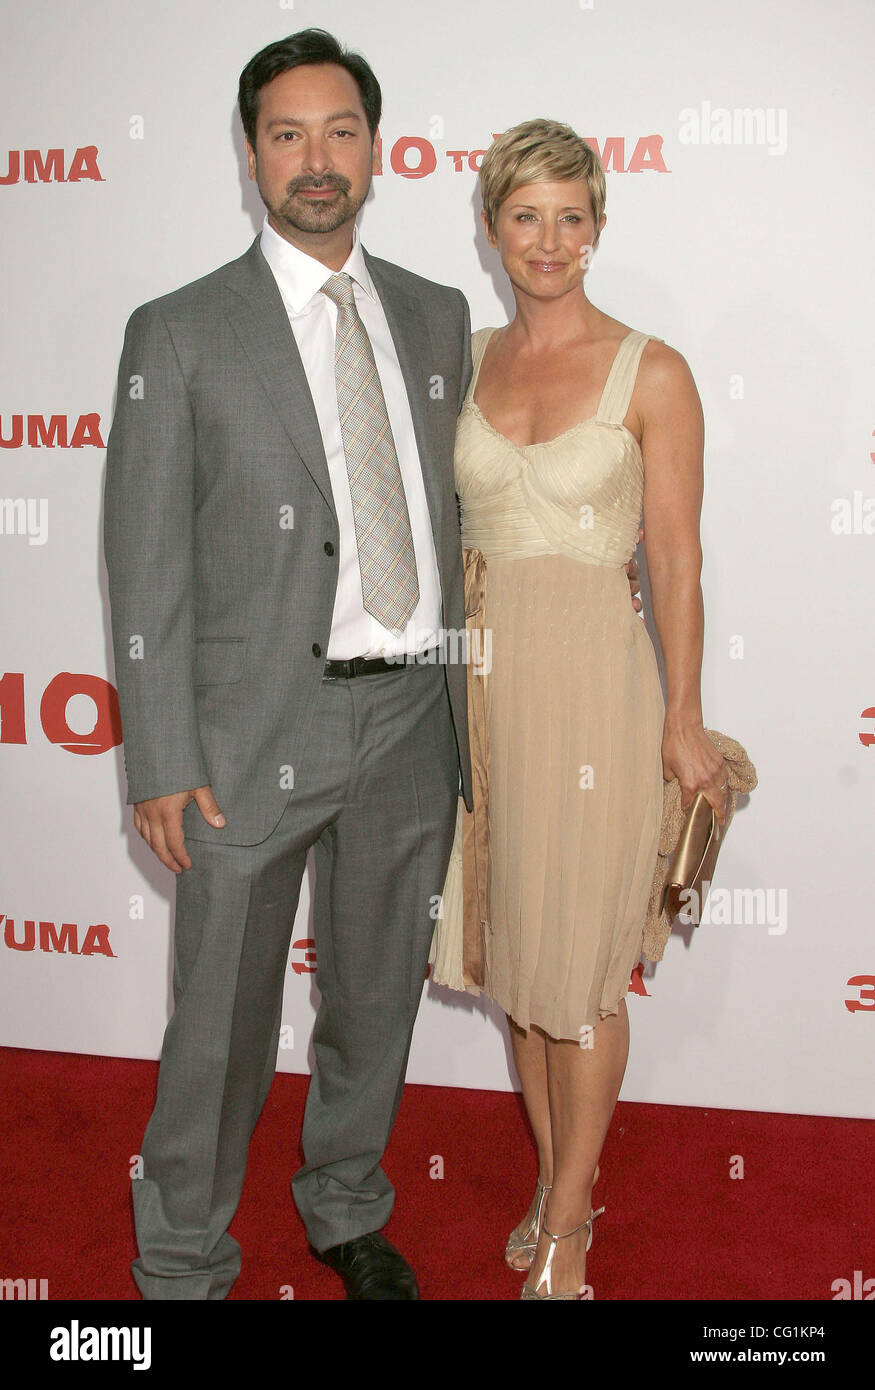 Aug 21, 2007; Los Angeles, California, USA;  Director JAMES MANGOLD and Producer CATHY KONRAD  at the '310 To Yuma' Los Angeles Premiere held at the Mann  National Theater, Westwood.  Mandatory Credit: Photo by Paul Fenton/ZUMA Press. (©) Copyright 2007 by Paul Fenton Stock Photo